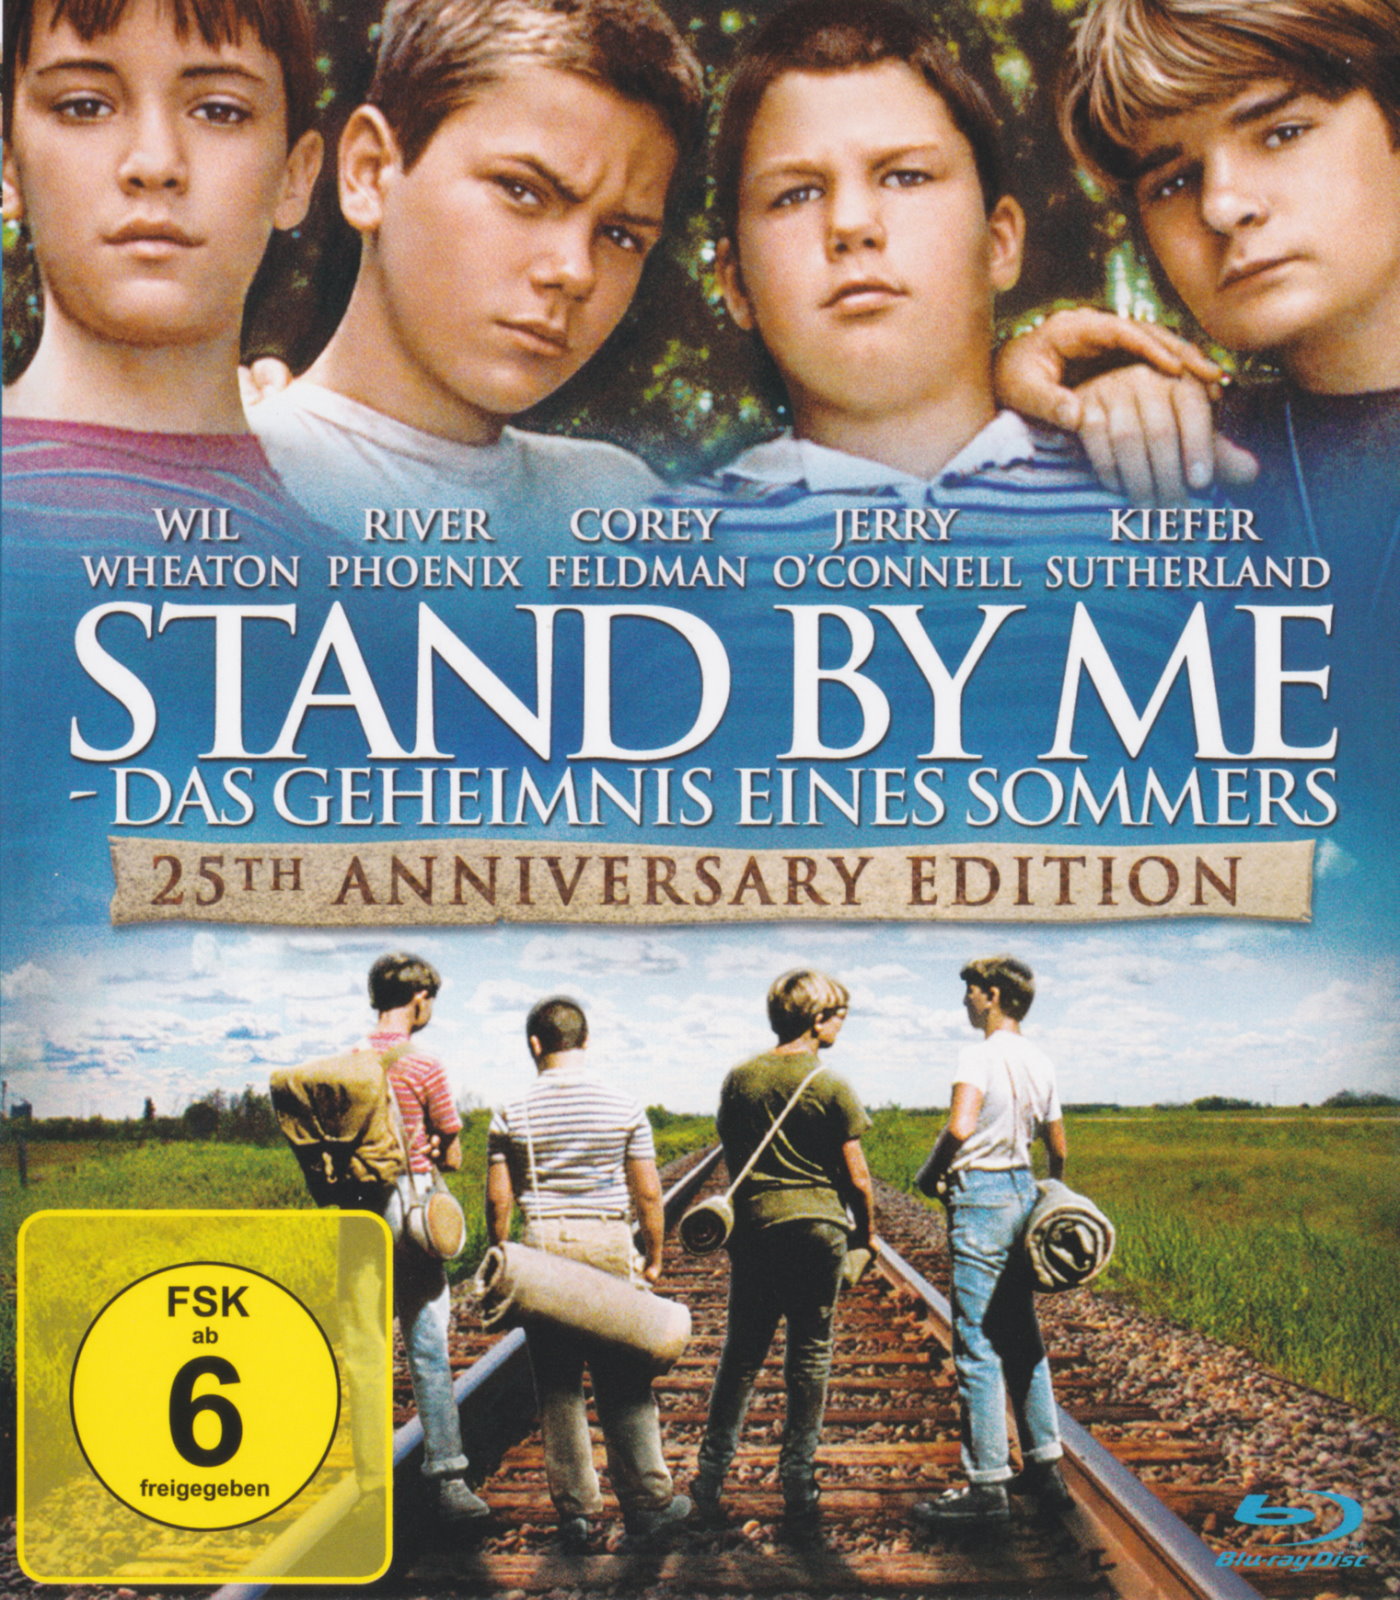 Cover - Stand by Me - Das Geheimnis eines Sommers.jpg